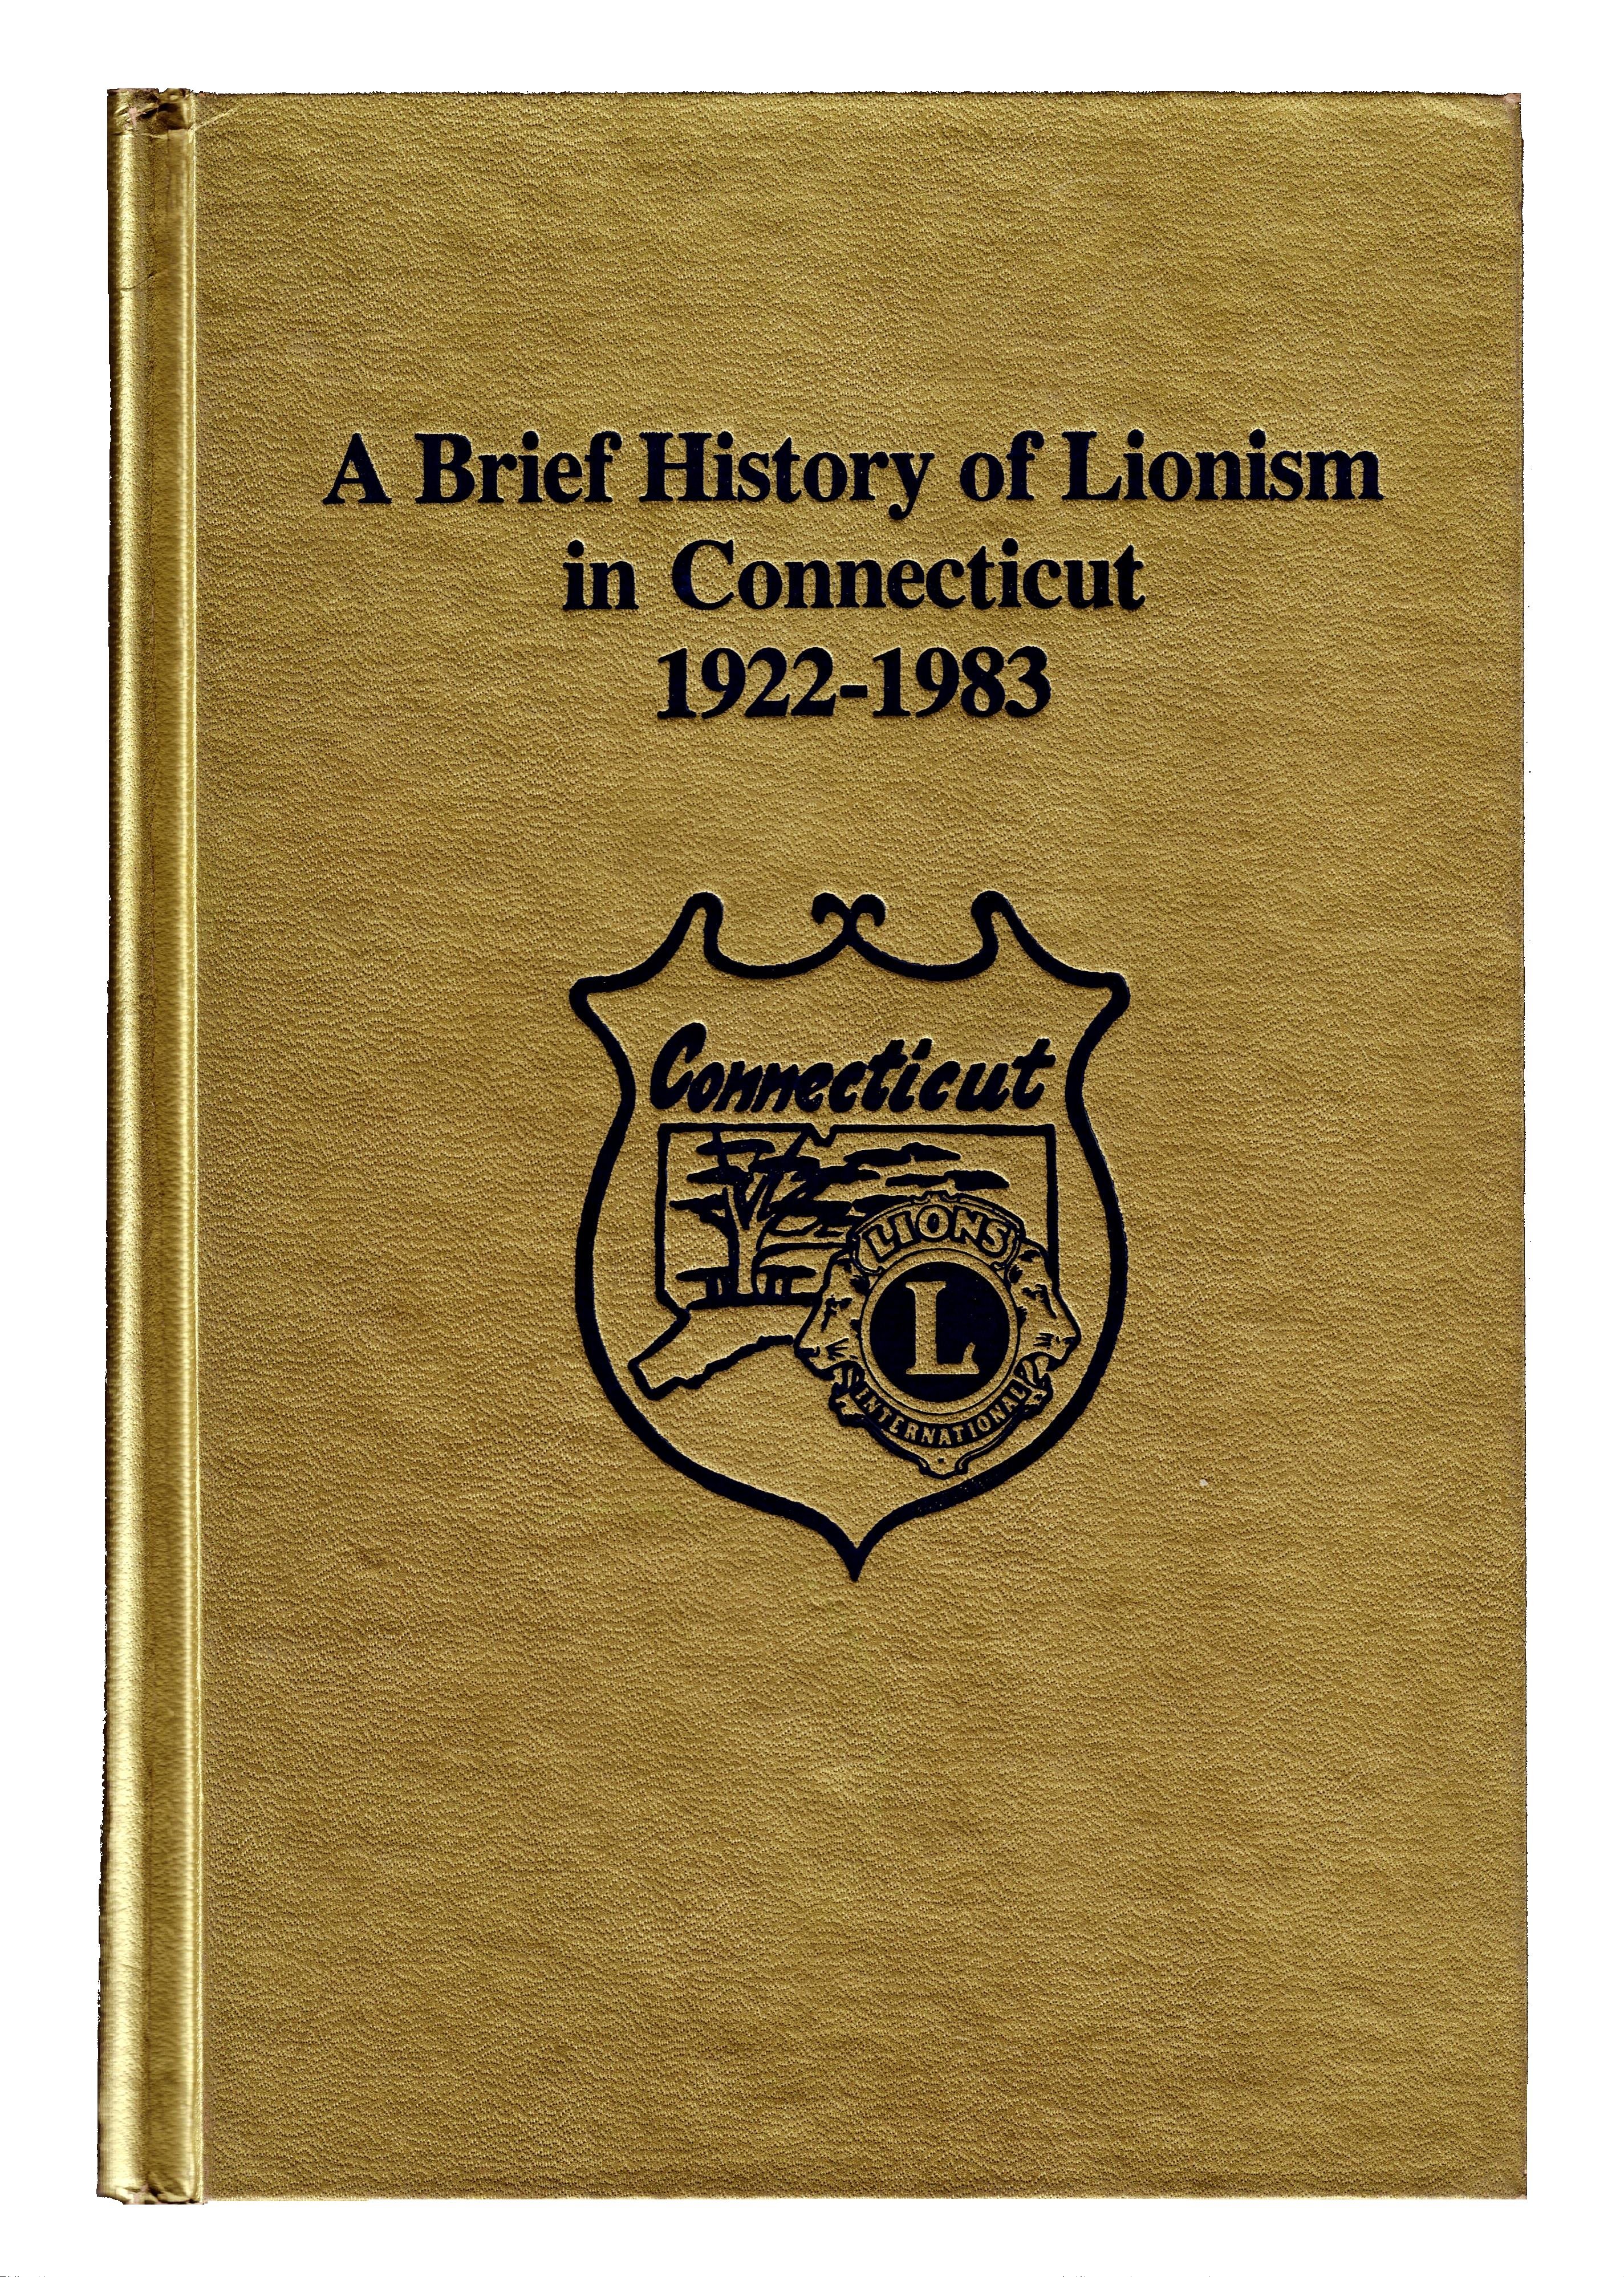 A Brief History of Lionism in Connecticut 1922-1983